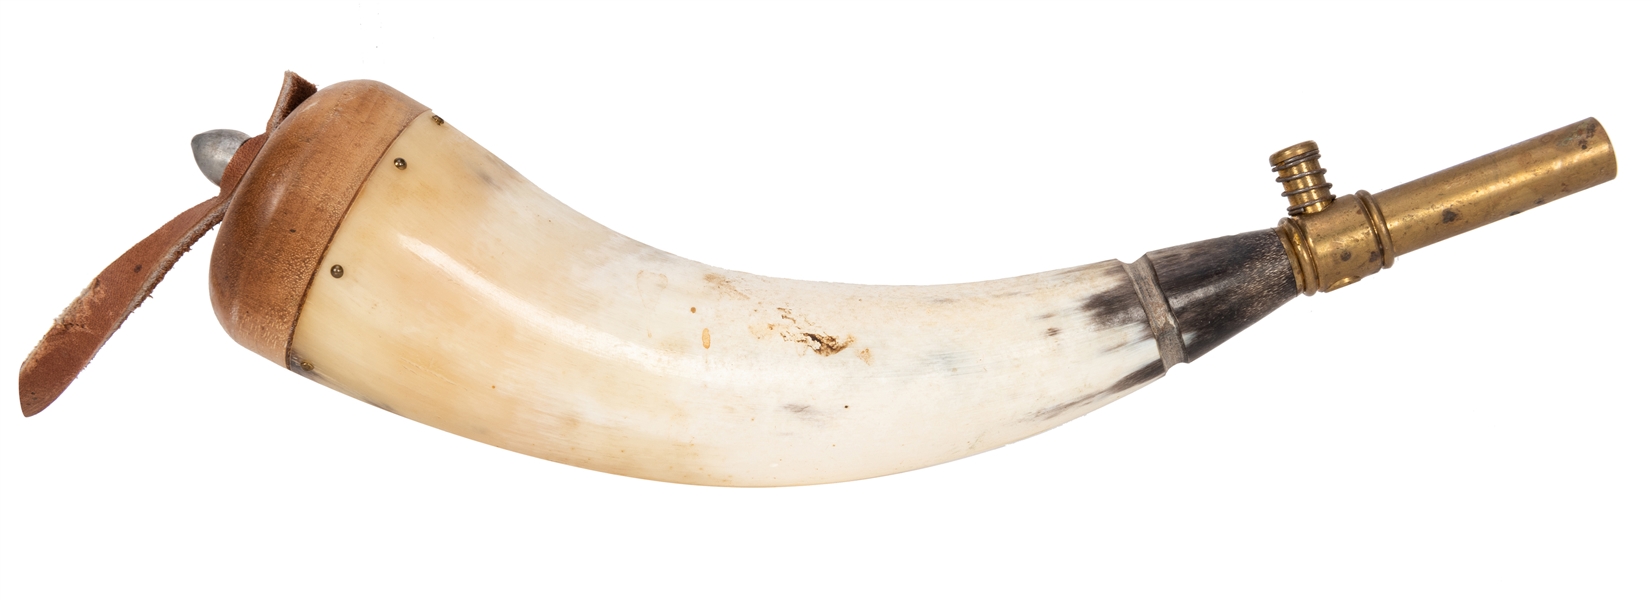 American Powder Horn with Brass Fitting.